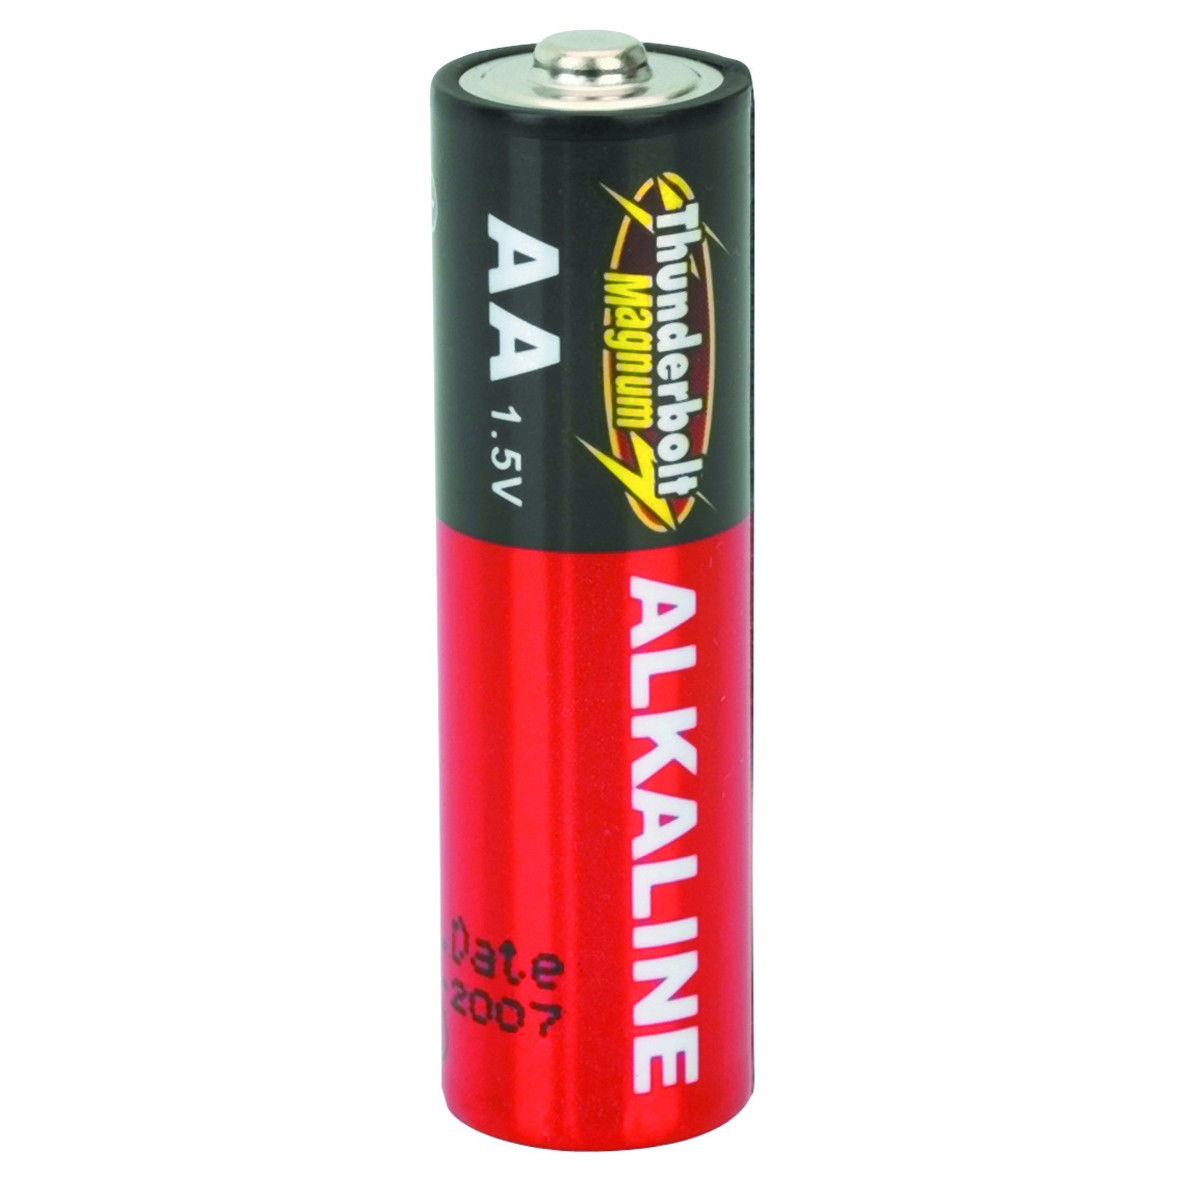 subcategory Bolt Mike Batteries